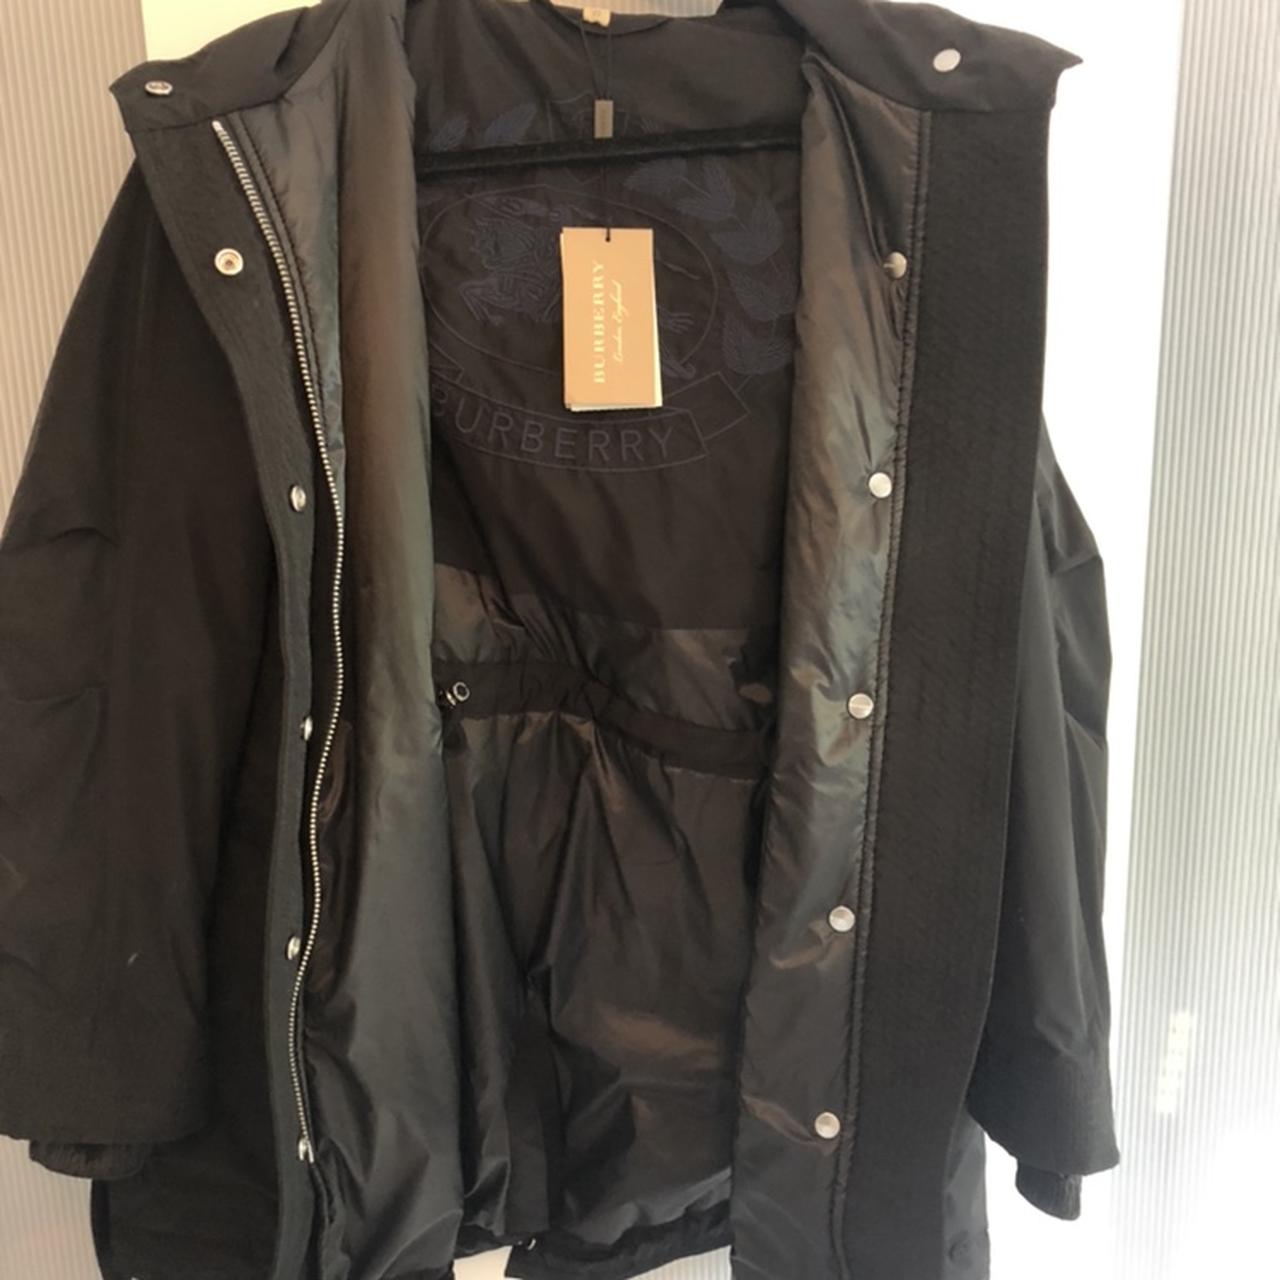 Brand new with tags !! Burberry Portobello Hooded... - Depop